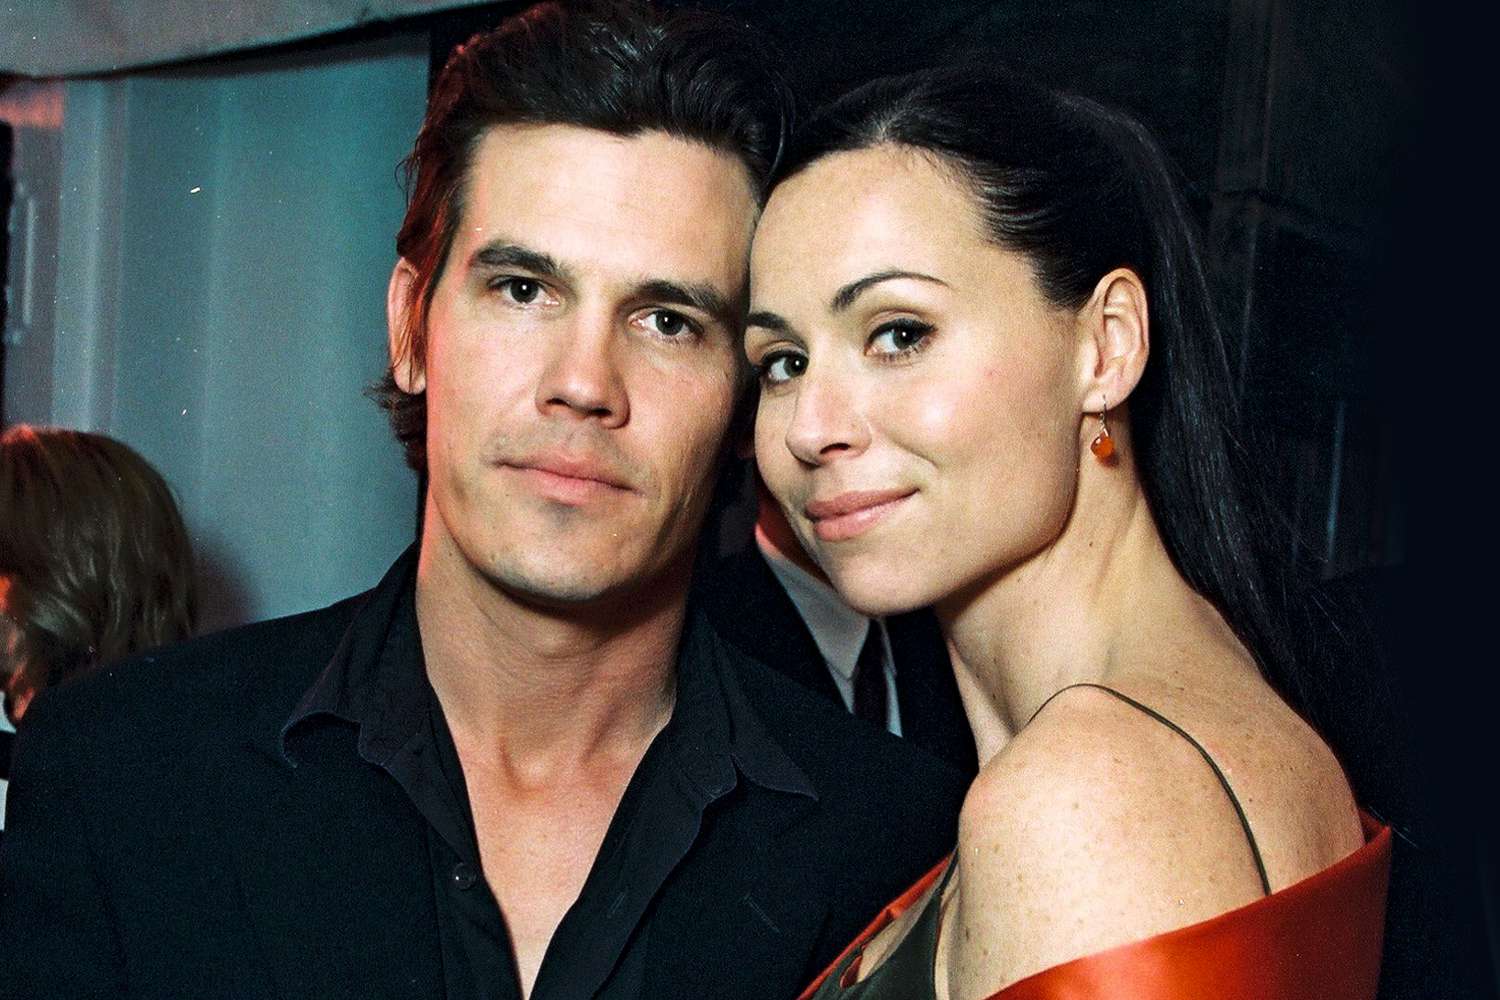 Minnie Driver Says Marrying Ex-Fiancé Josh Brolin Would’ve Been 'the Biggest Mistake of My Life'